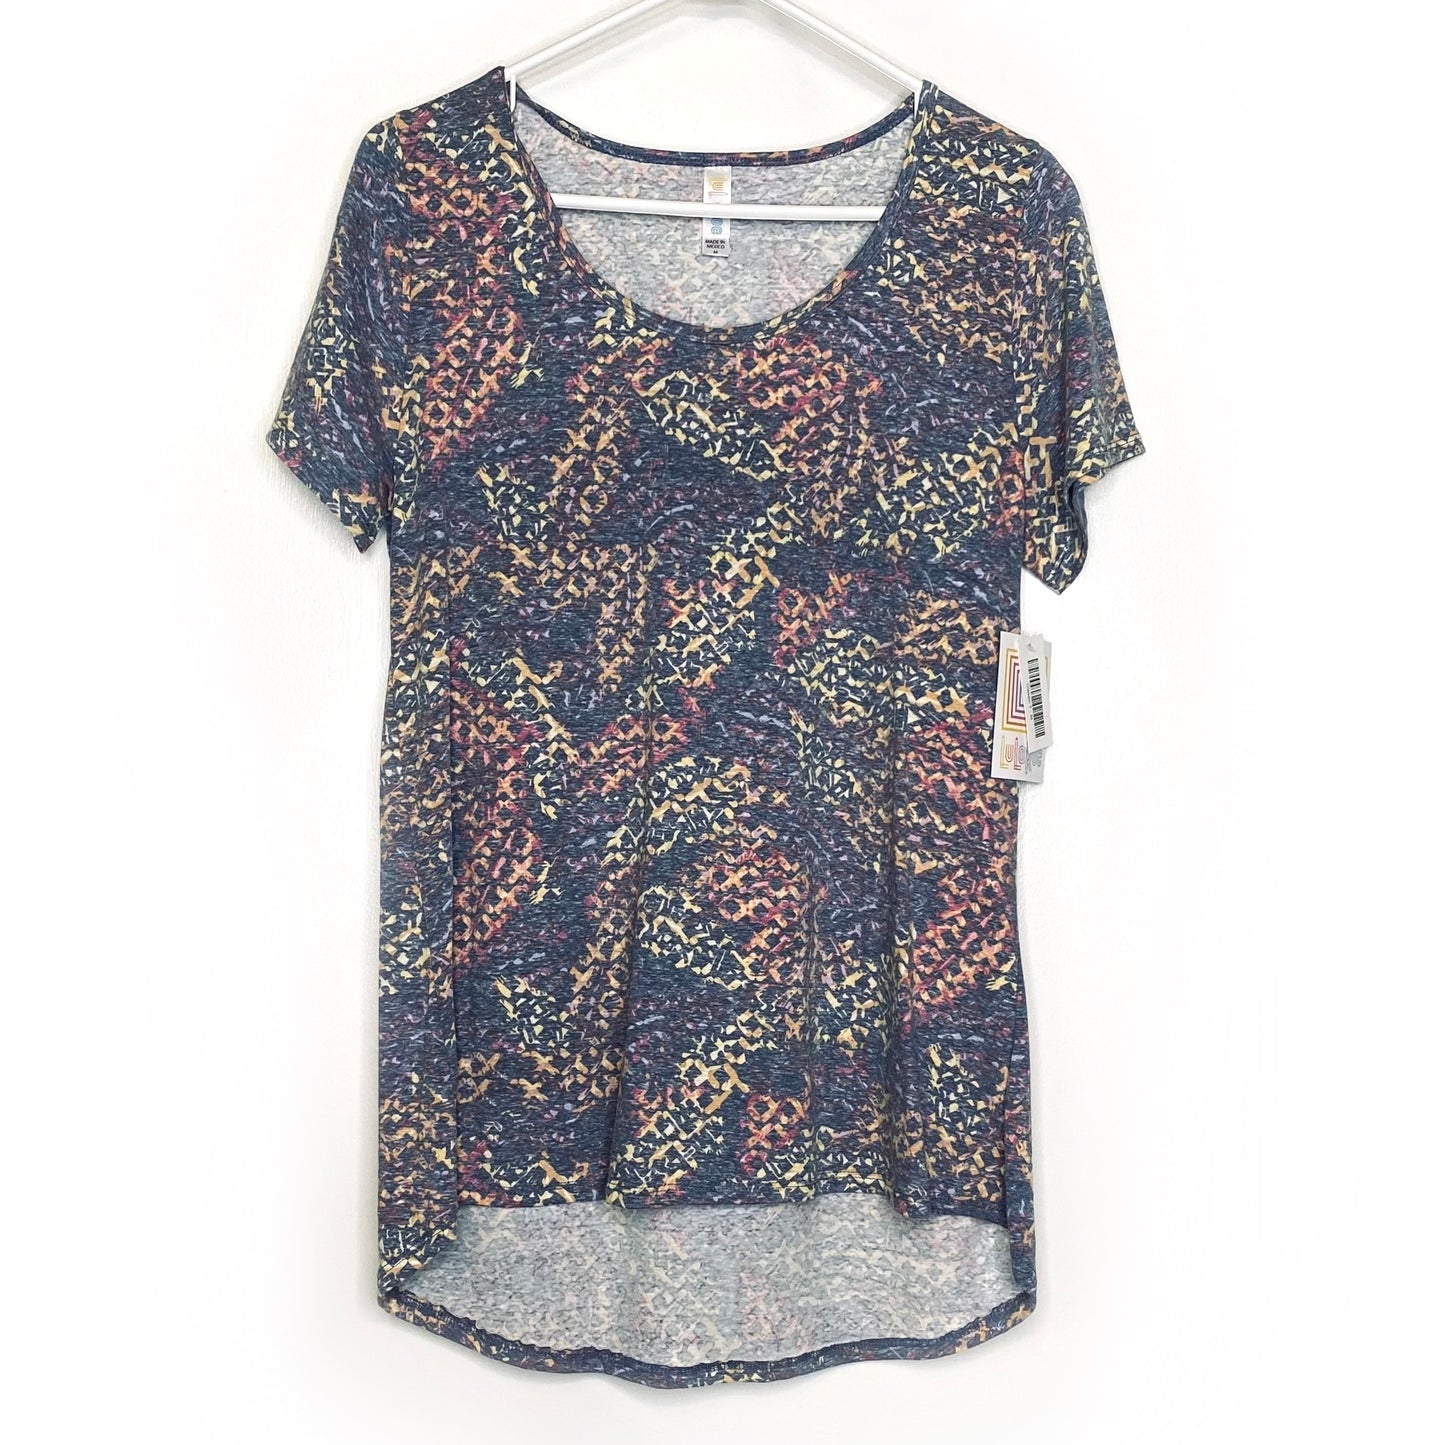 LuLaRoe Womens M Blue/Multicolor Hatch/Abstract Classic T S/s Top NWT